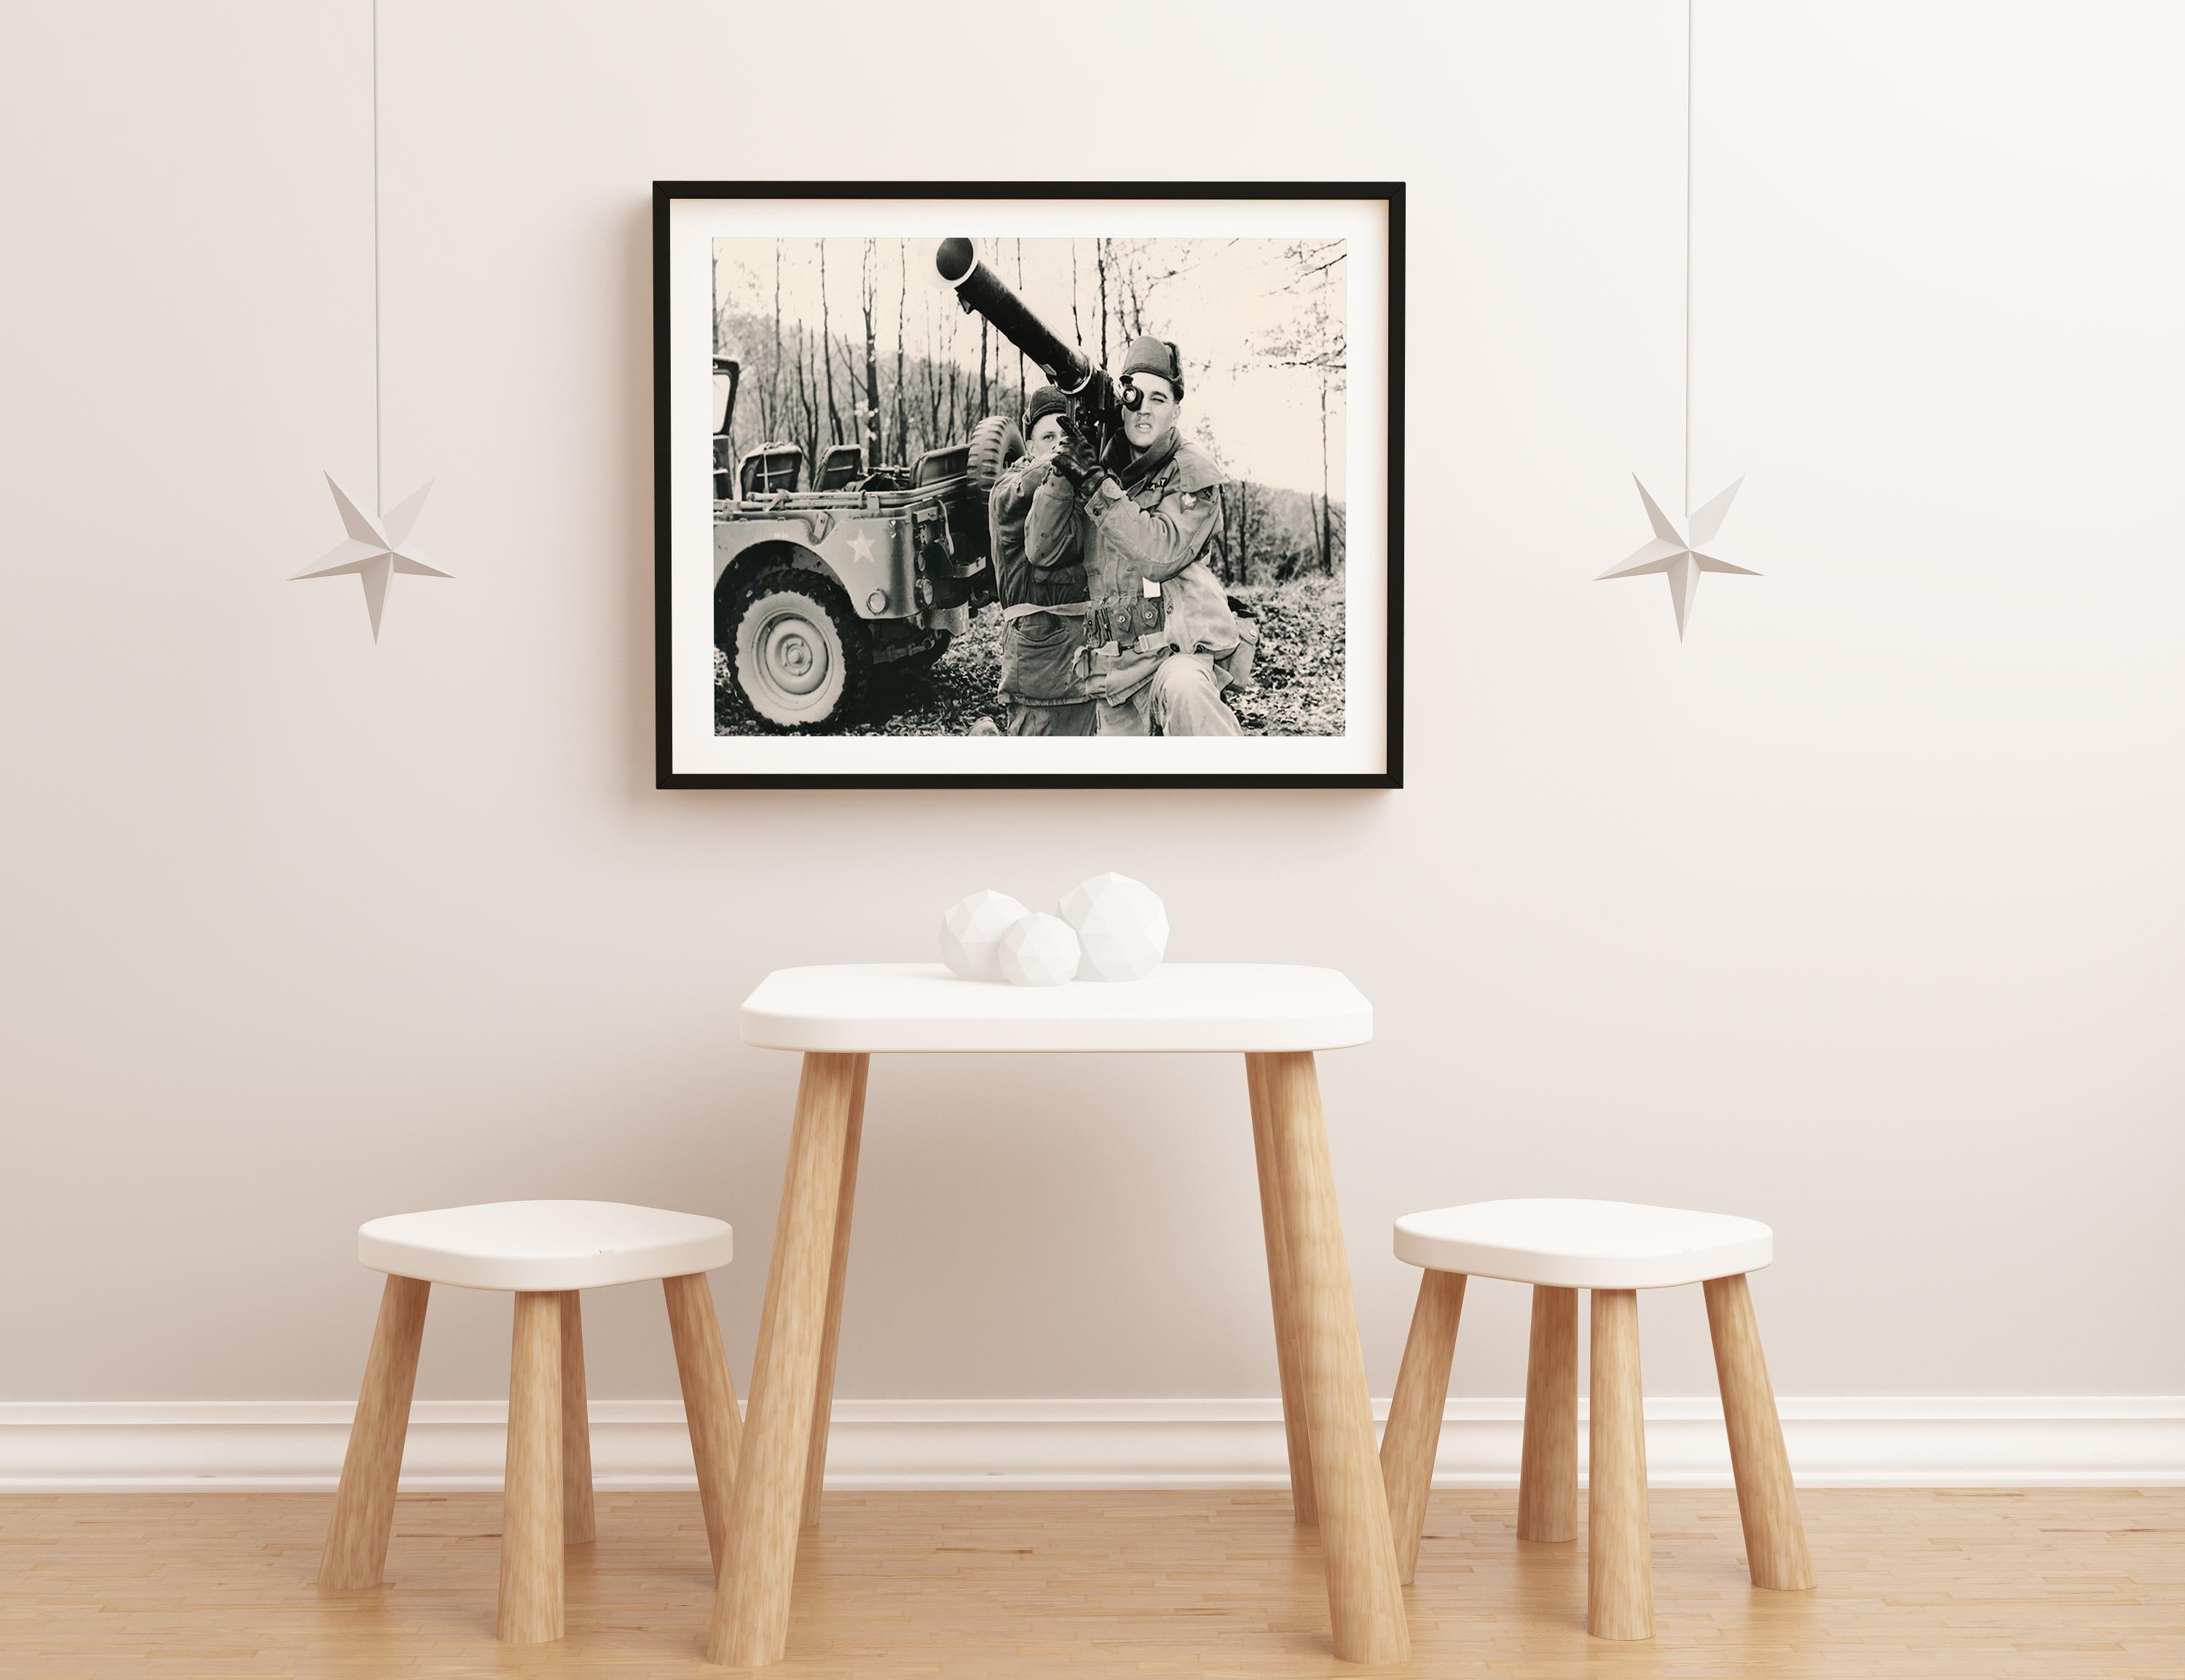 Elvis Presley Holding a Bazooka Fine Art Print - Gray Black and White Photograph by Unknown